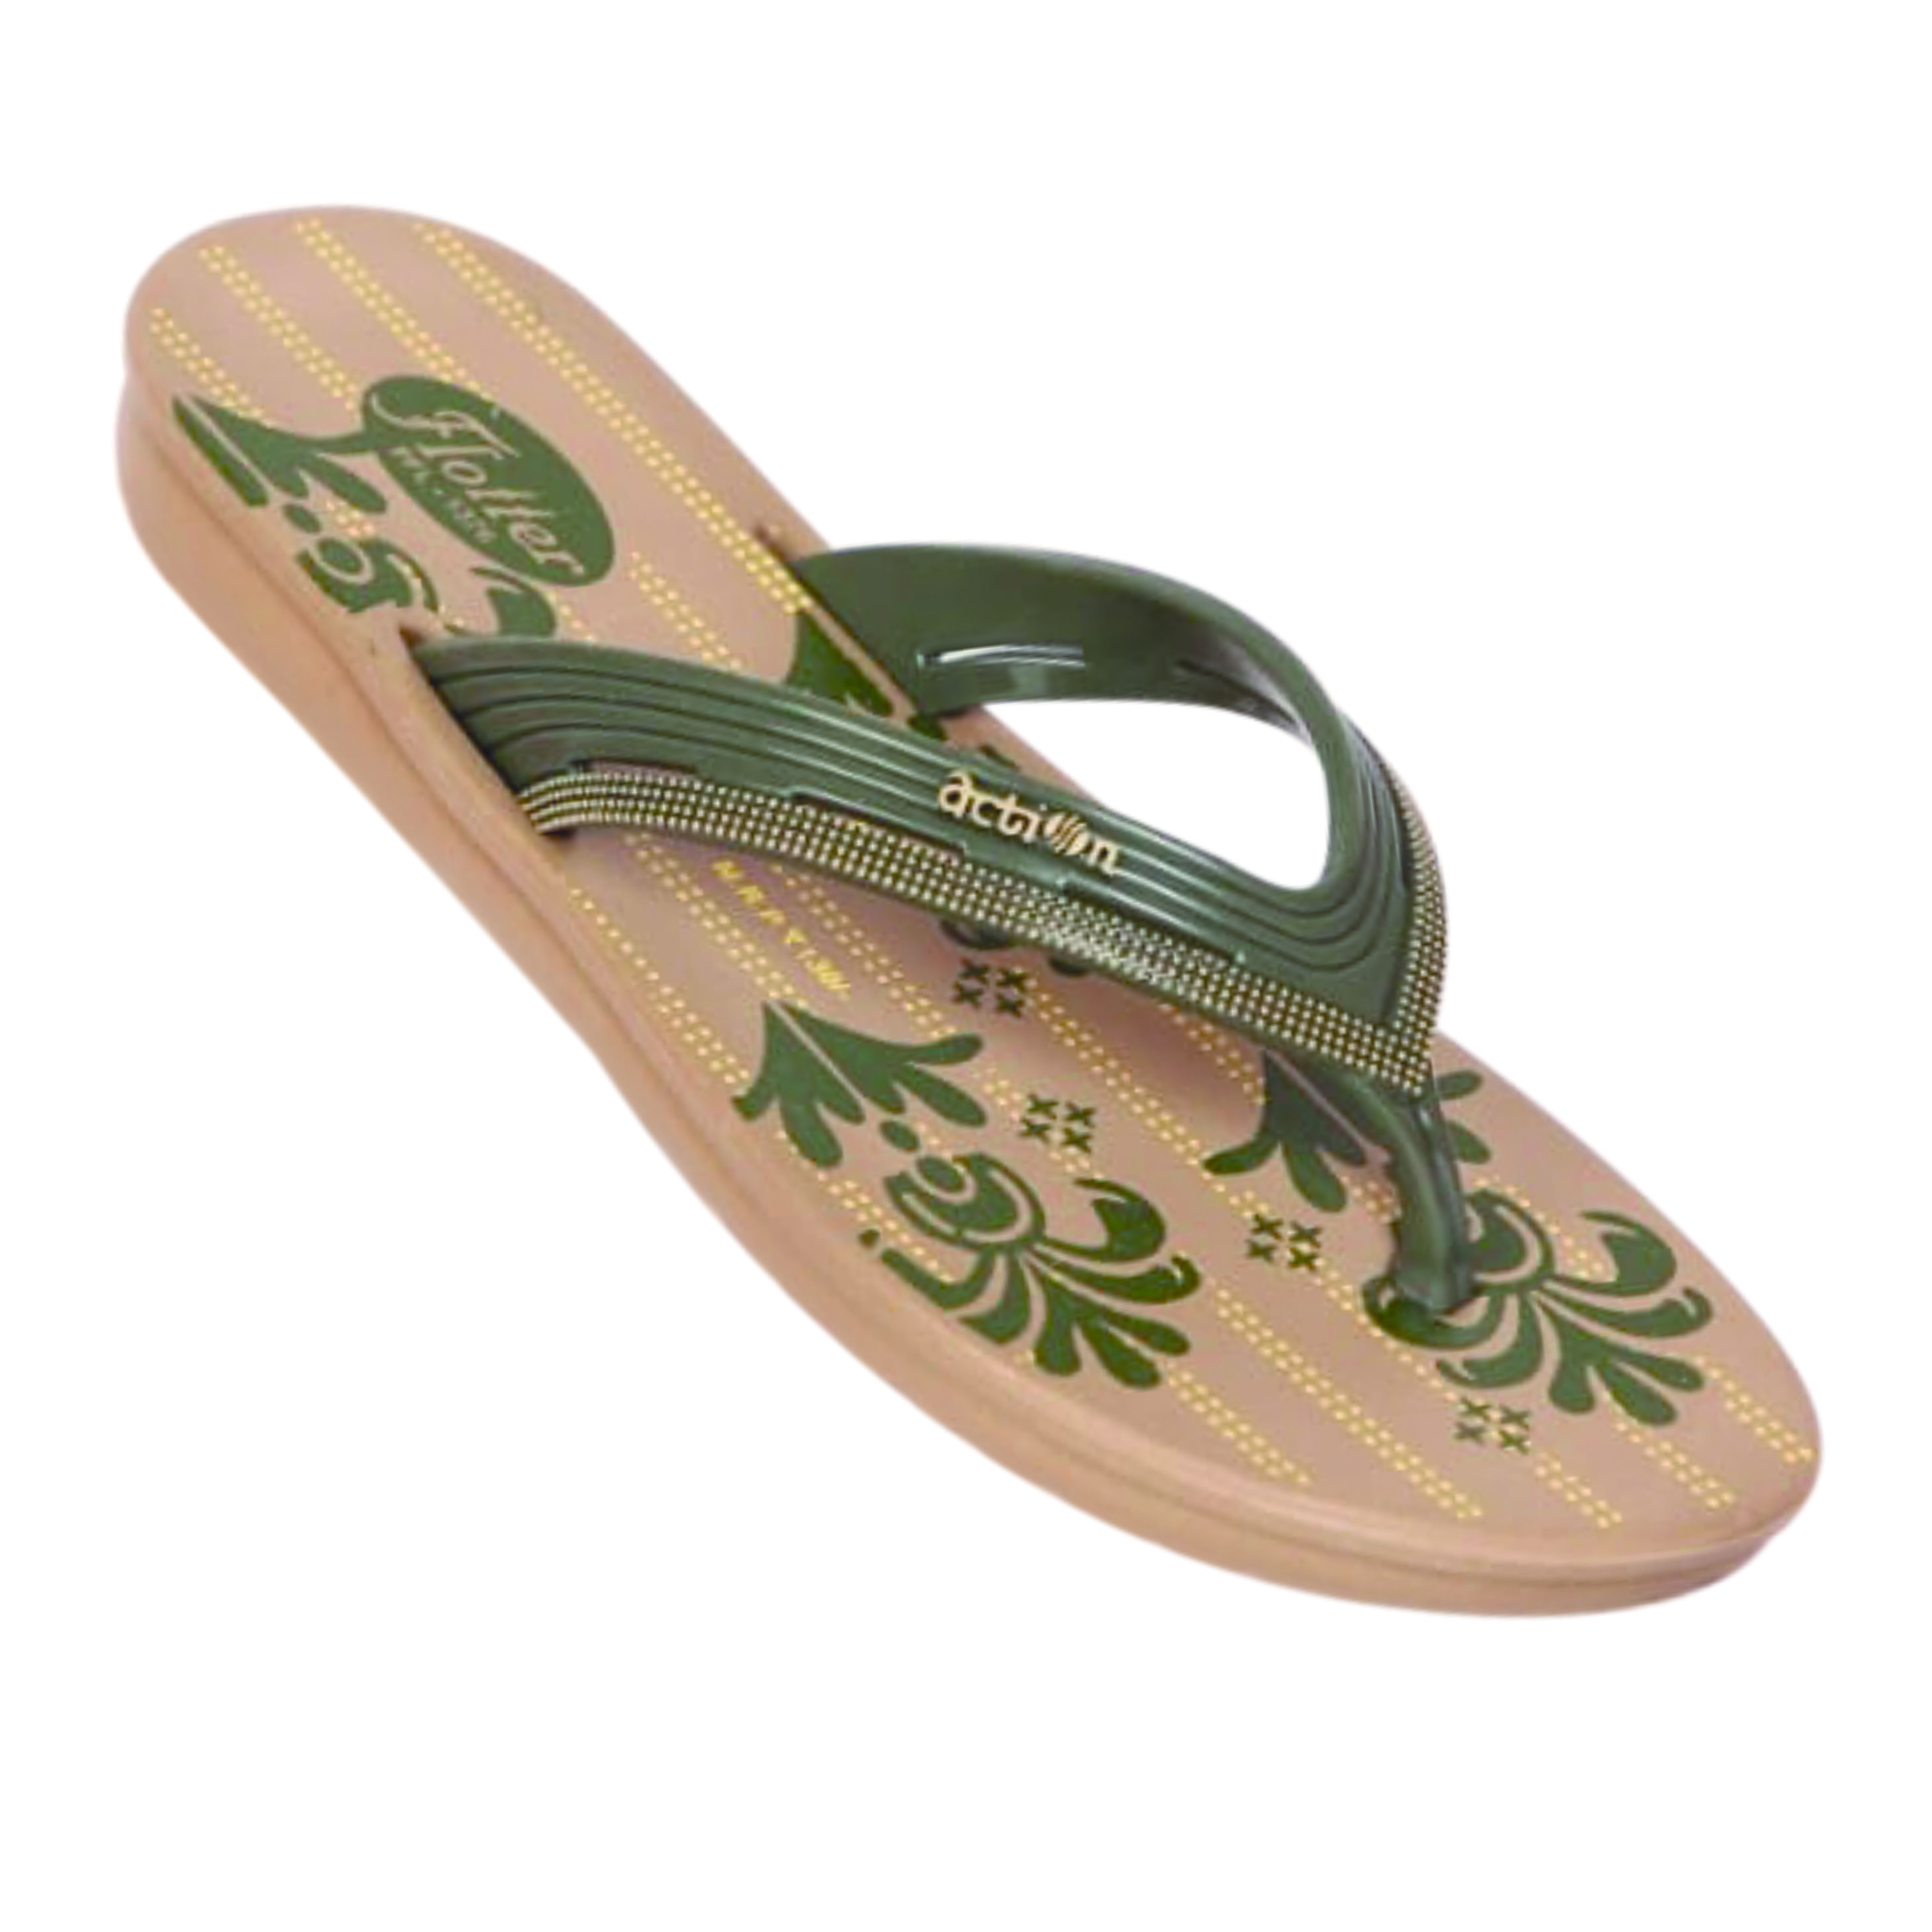 action flotter slippers ladies